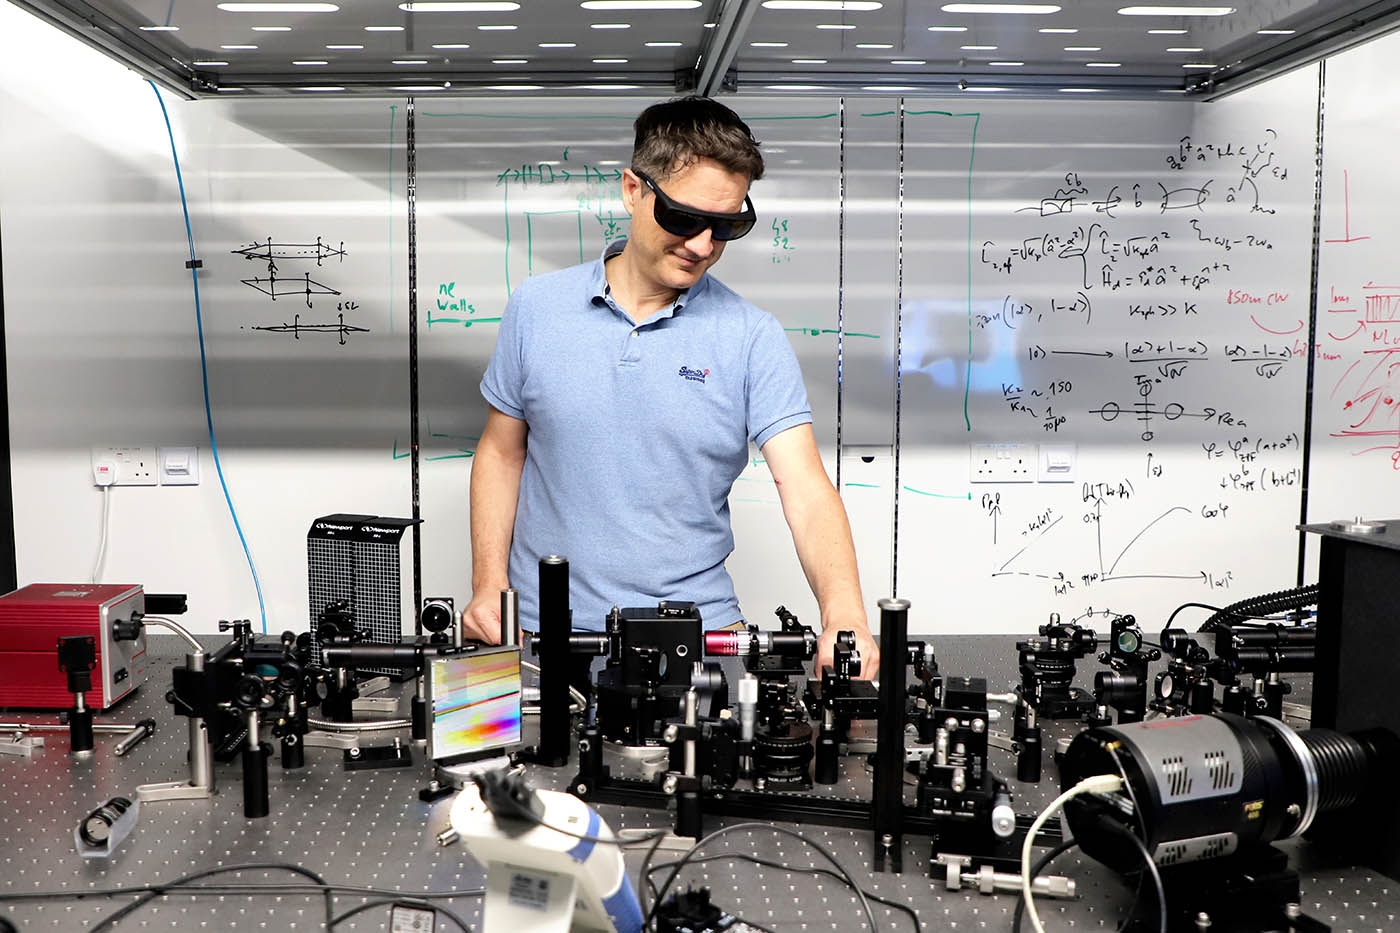 Researcher Maxime Richard stands behind a metal optical bench with components arrayed across the top. He is dressed in a pale blue polo shirt and wears laser safety glasses.